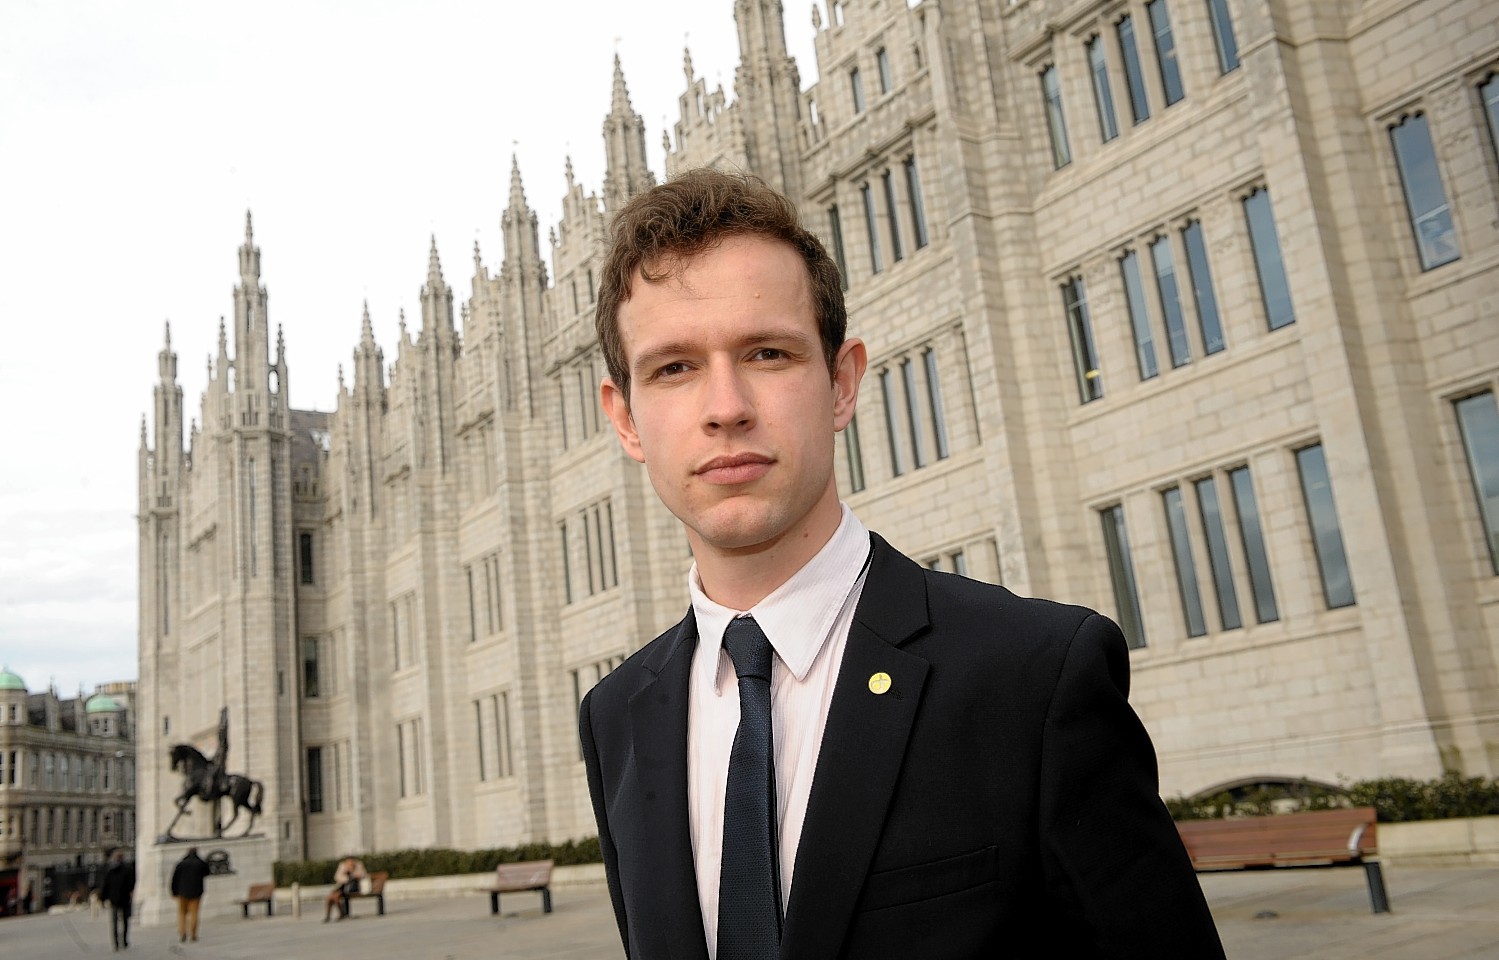 Callum McCaig MP has said "serious questions" need to be answered after it emerged the repair bill for Aberdeen's Town House has nearly trebled.